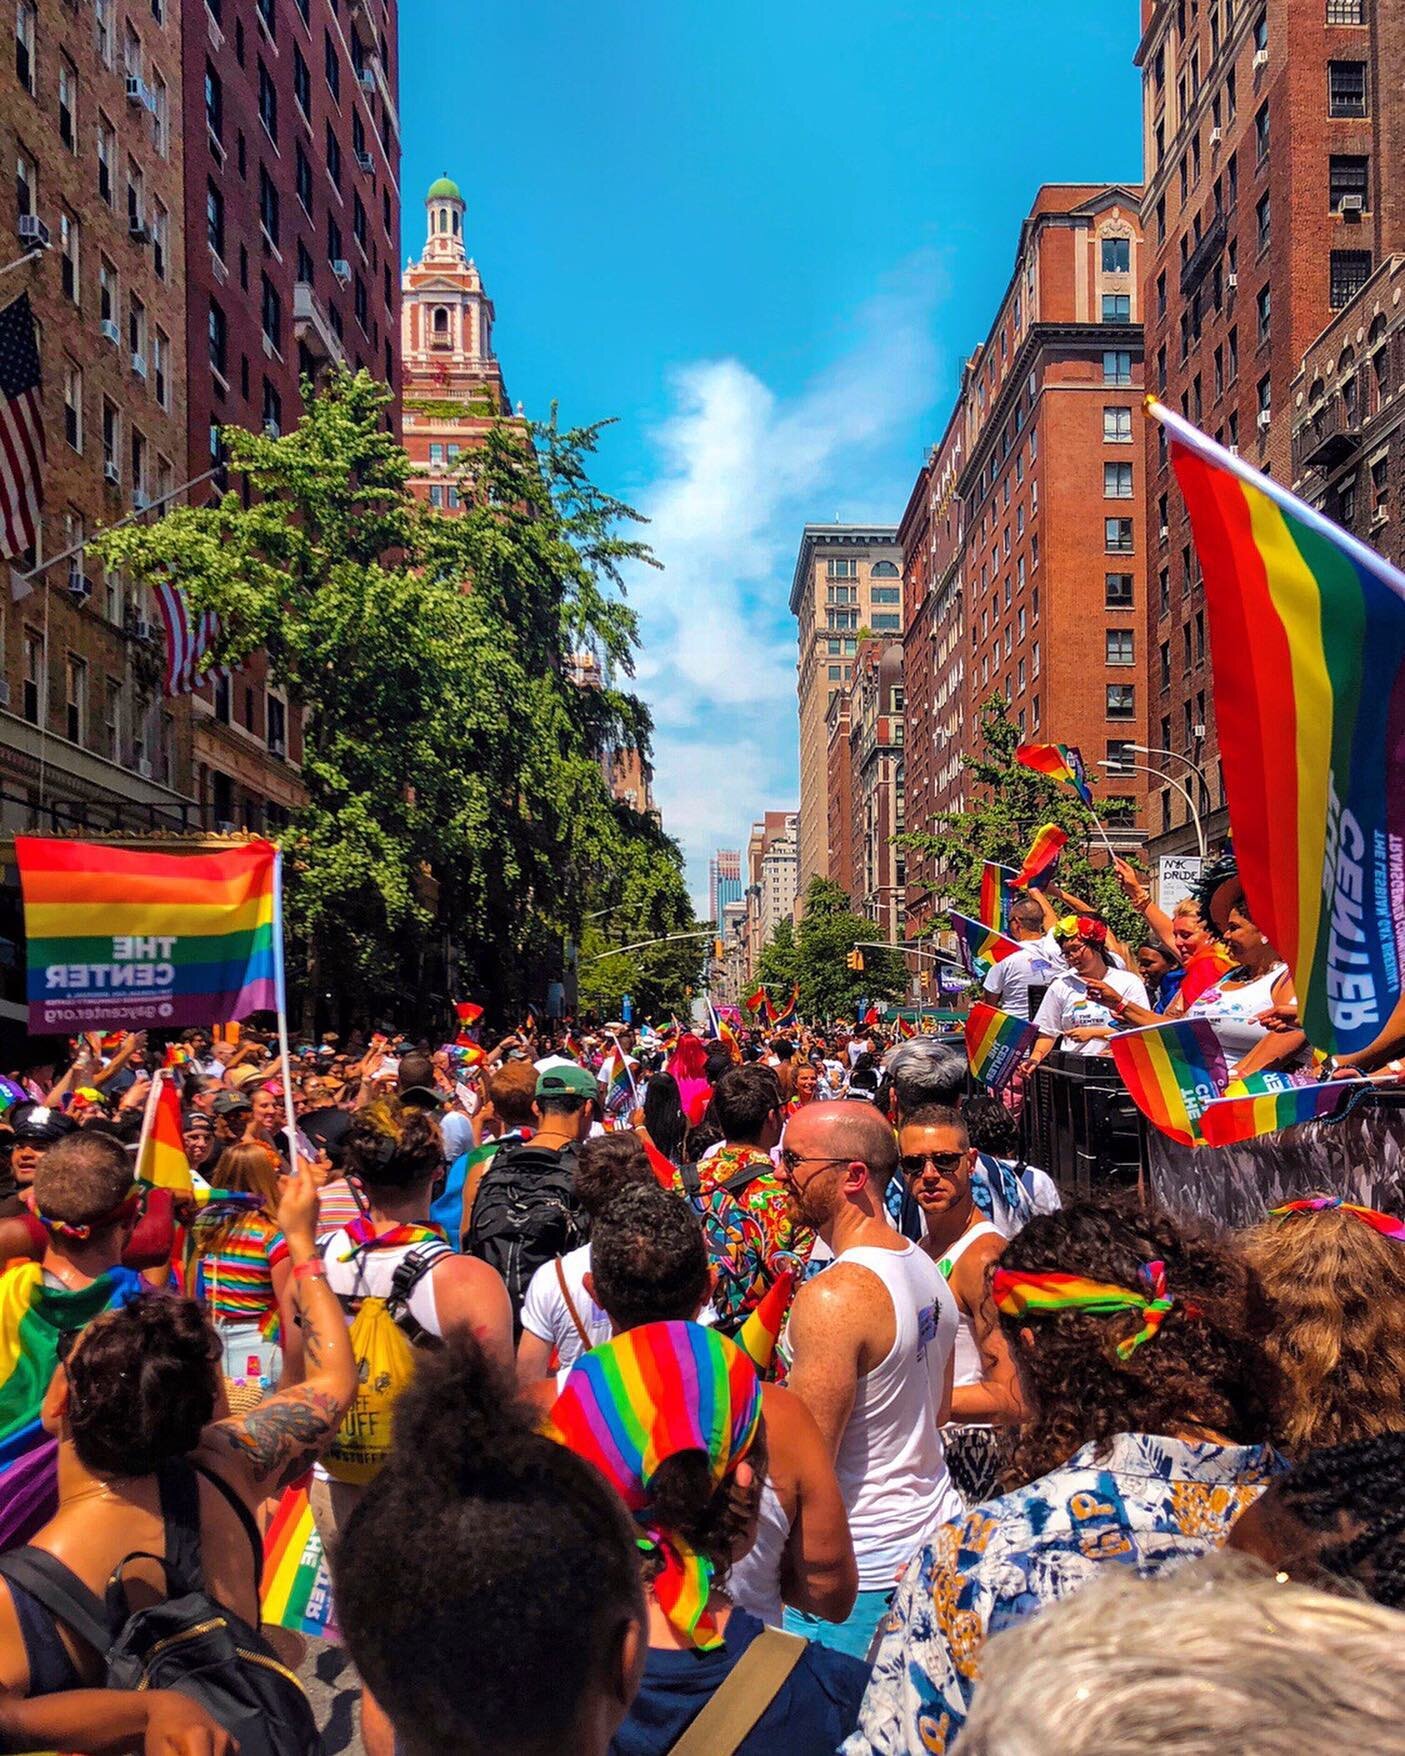 Happy Pride! Catch me marching in these streets today 🌈🎉 #worldpride2019 #stonewall50